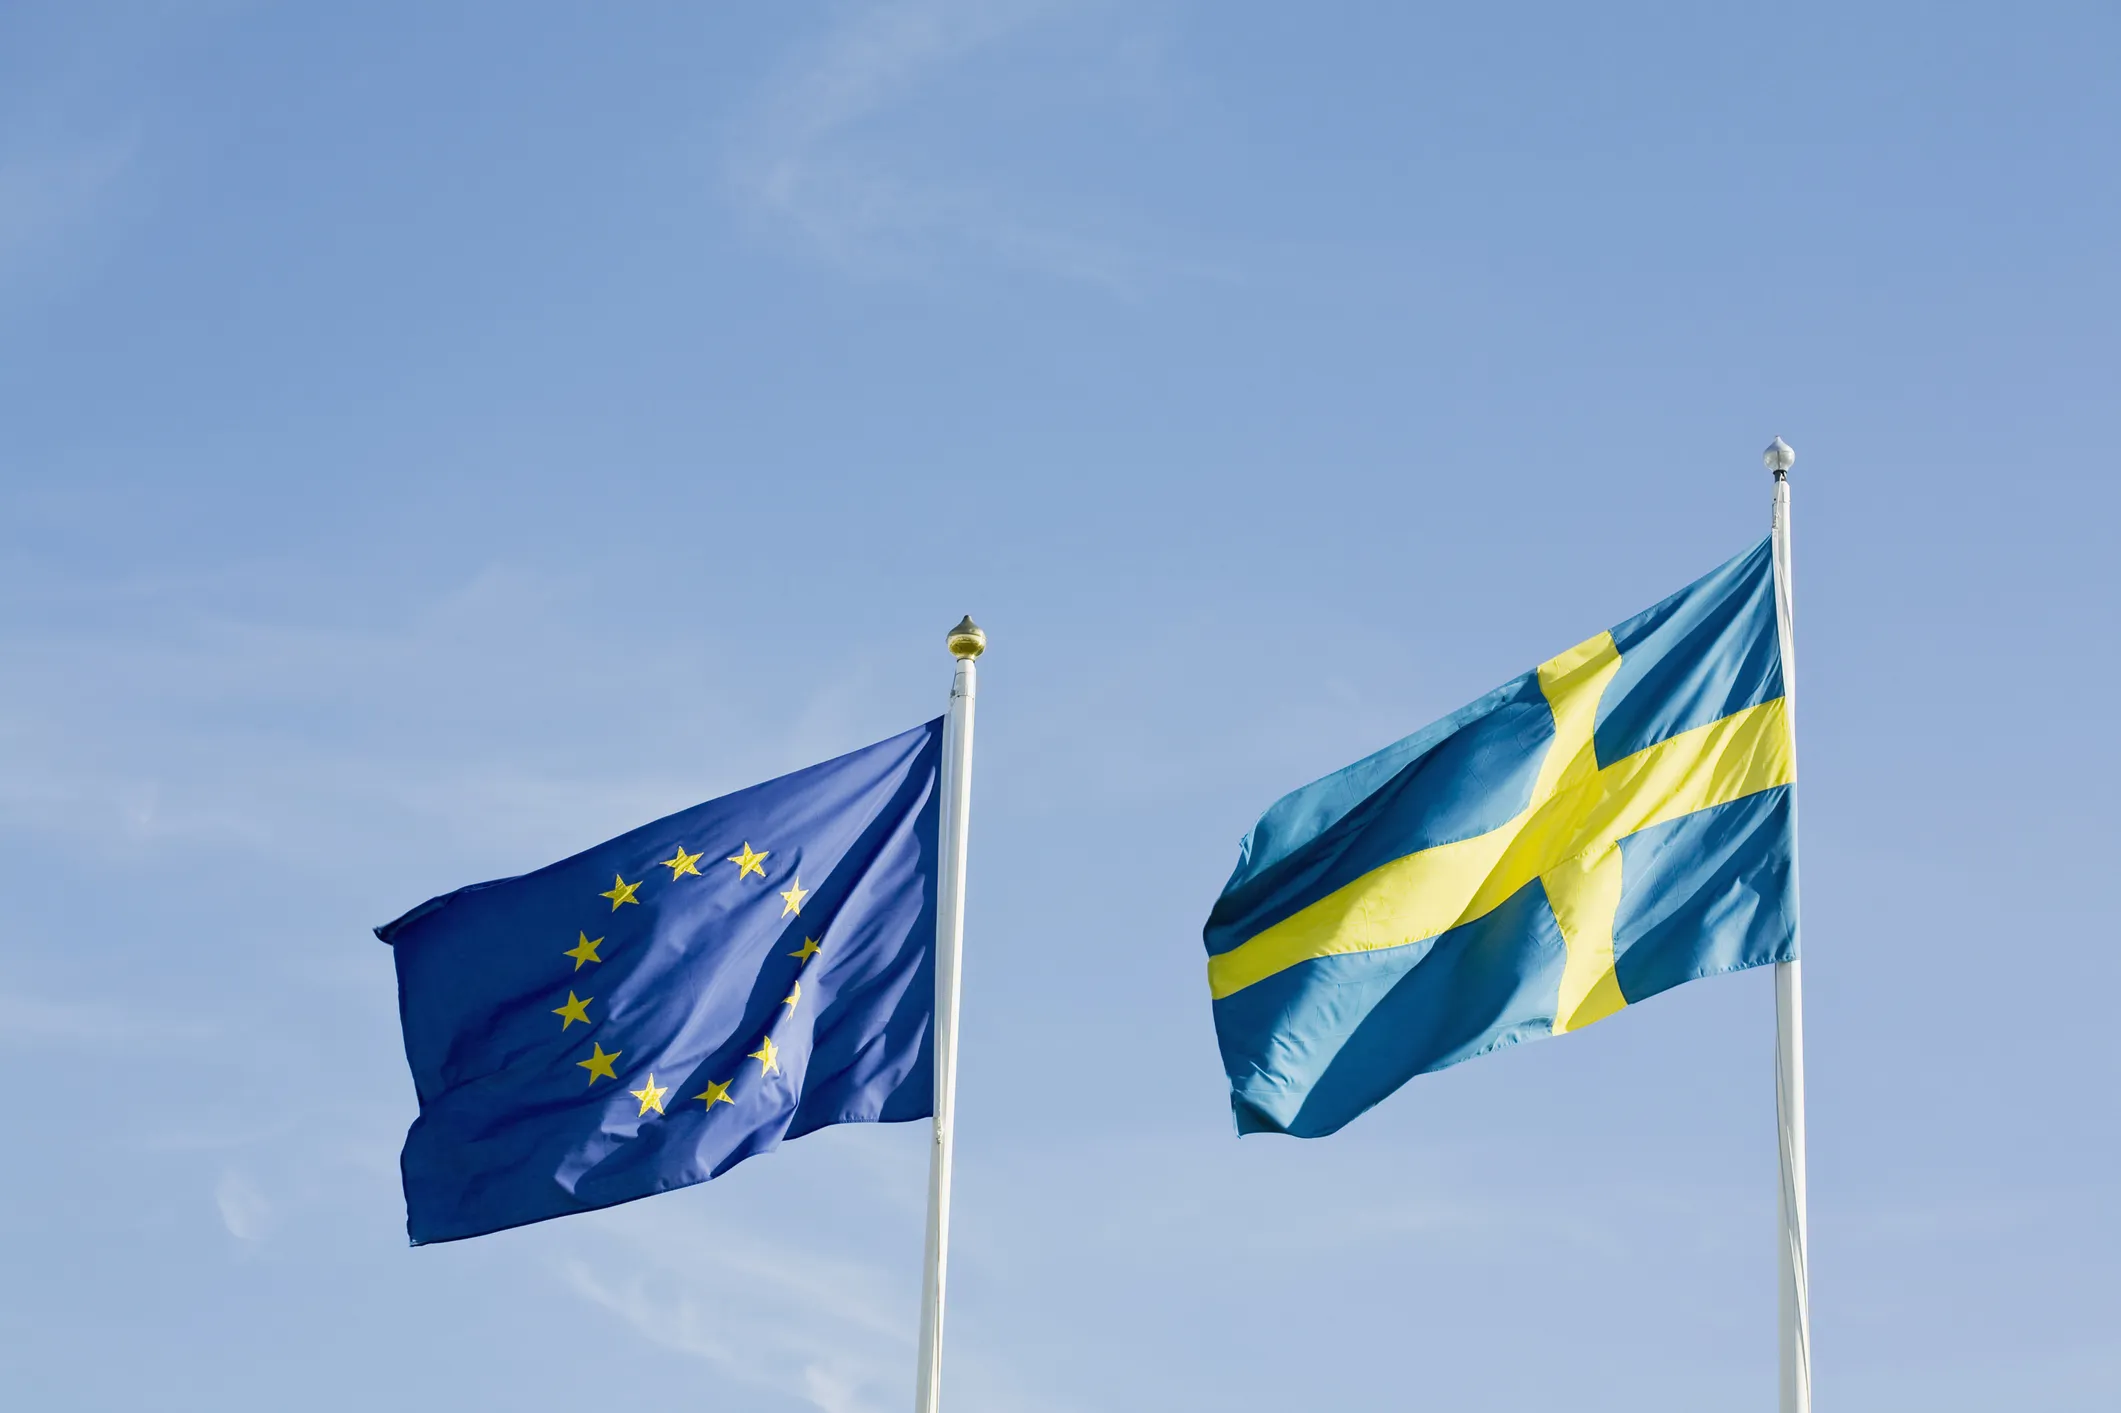 Sweden’s Council Presidency: The driving force behind the India-EU FTA  